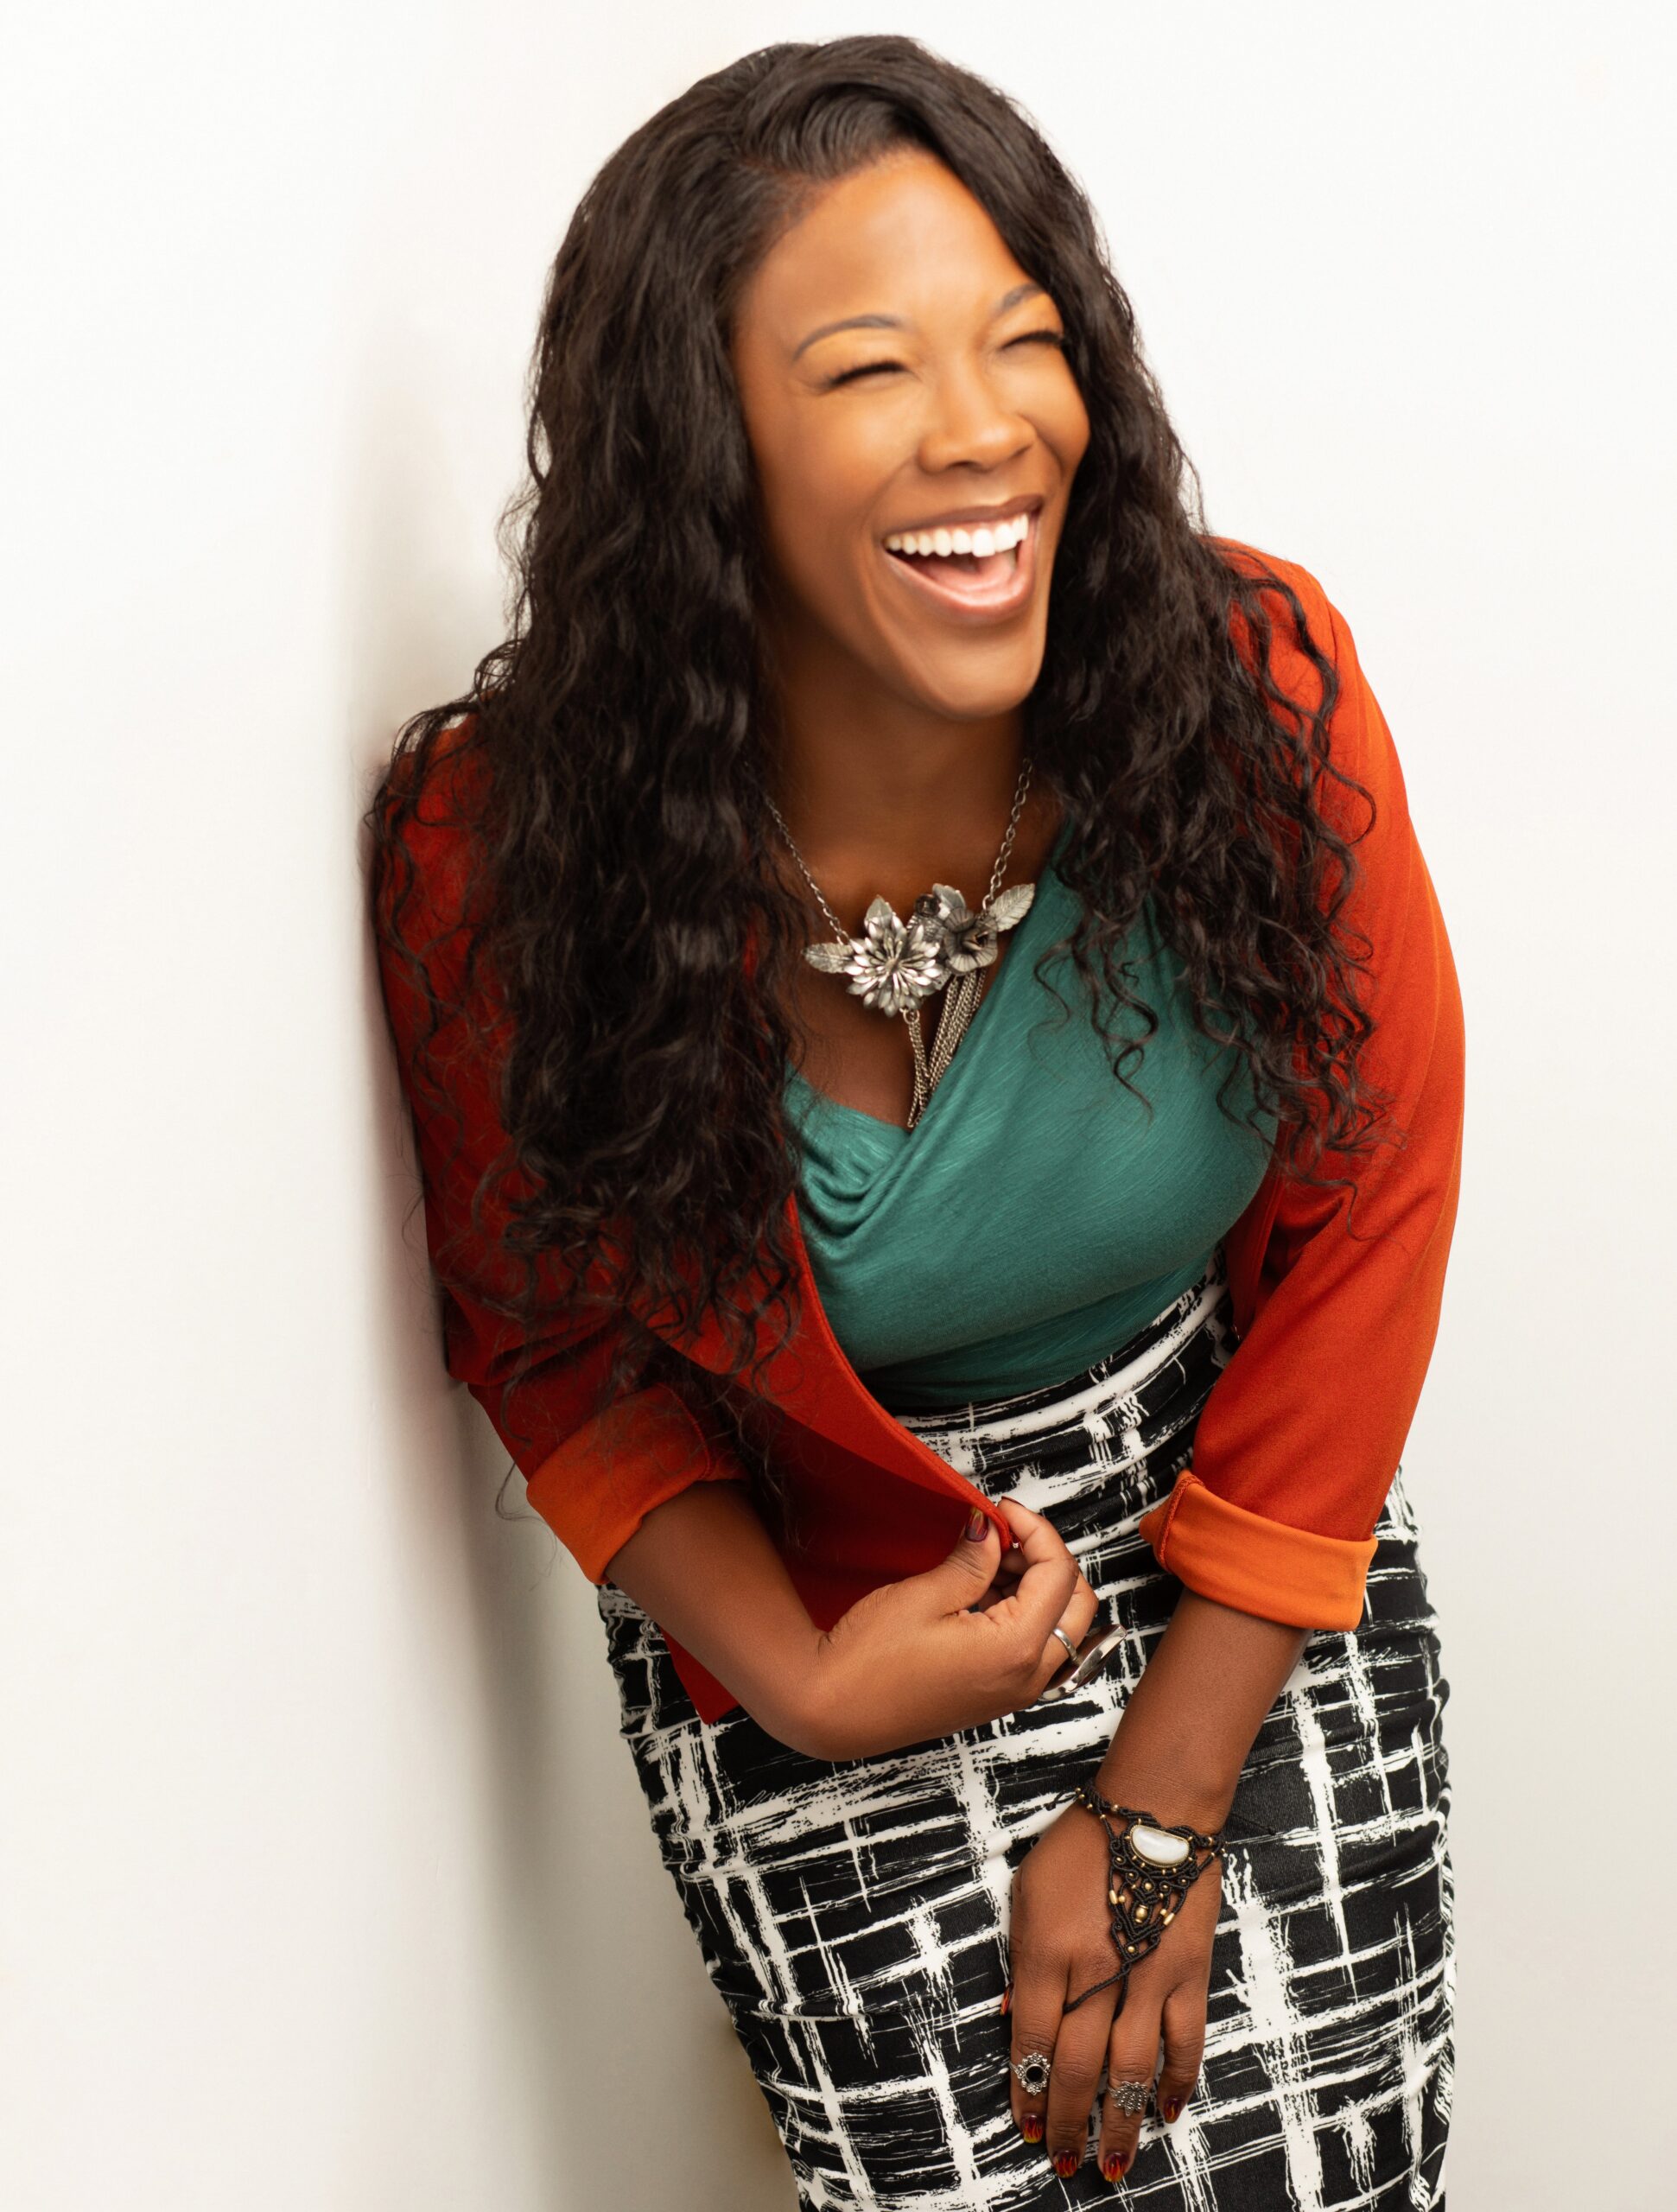 Dr. Jasmonae Joyriel is an inspirational speaker, transformative therapist, and guide for her luxury wellness retreats